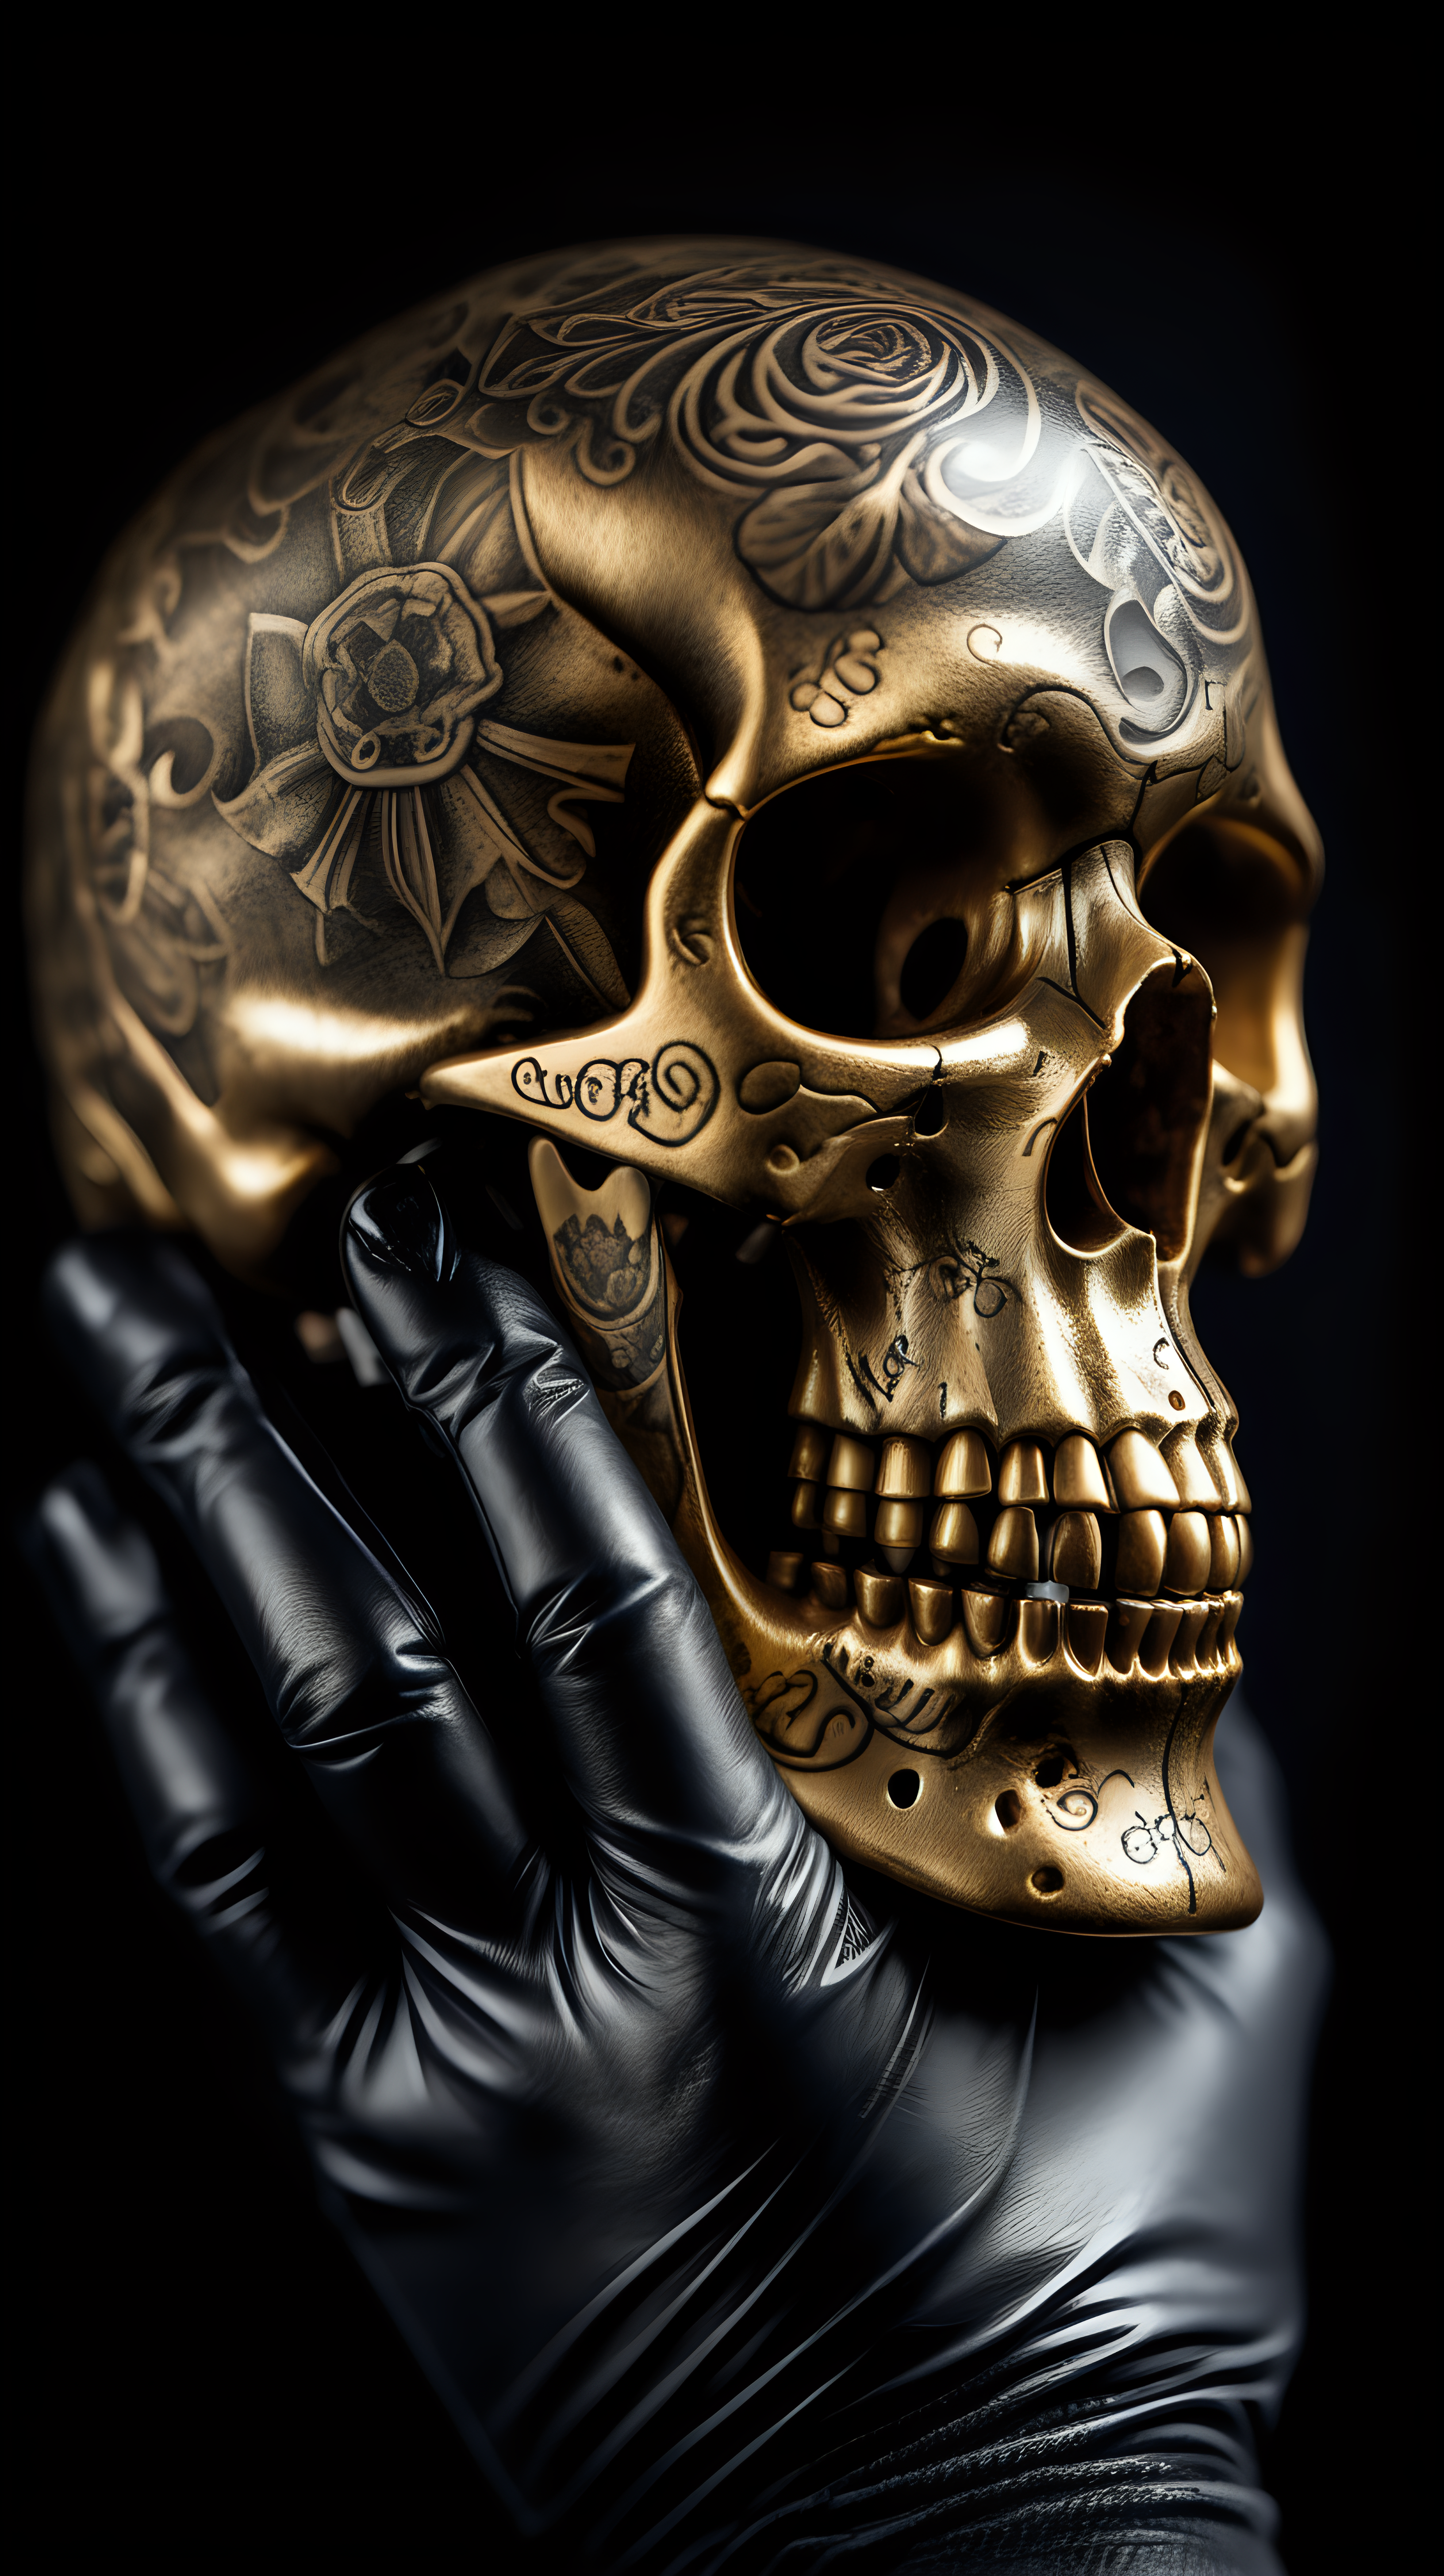 /imagine prompt : An ultra-realistic photograph captured with a canon 5d mark III camera, equipped with an macro lens at F 5.8 aperture setting, capturing a vintage tattoo machine ,The pattern of the skull is engraved on it's golden grip , placed in the hand wearing black nitrile gloves.
the hand is blurred and the focus sets on tattoogun's grip.
Soft spot light gracefully illuminates the subject and golden grip is shining. The background is absolutely black , highlighting the subject.
The image, shot in high resolution and a 16:9 aspect ratio, captures the subject’s  with stunning realism –ar 9:16 –v 5.2 –style raw
